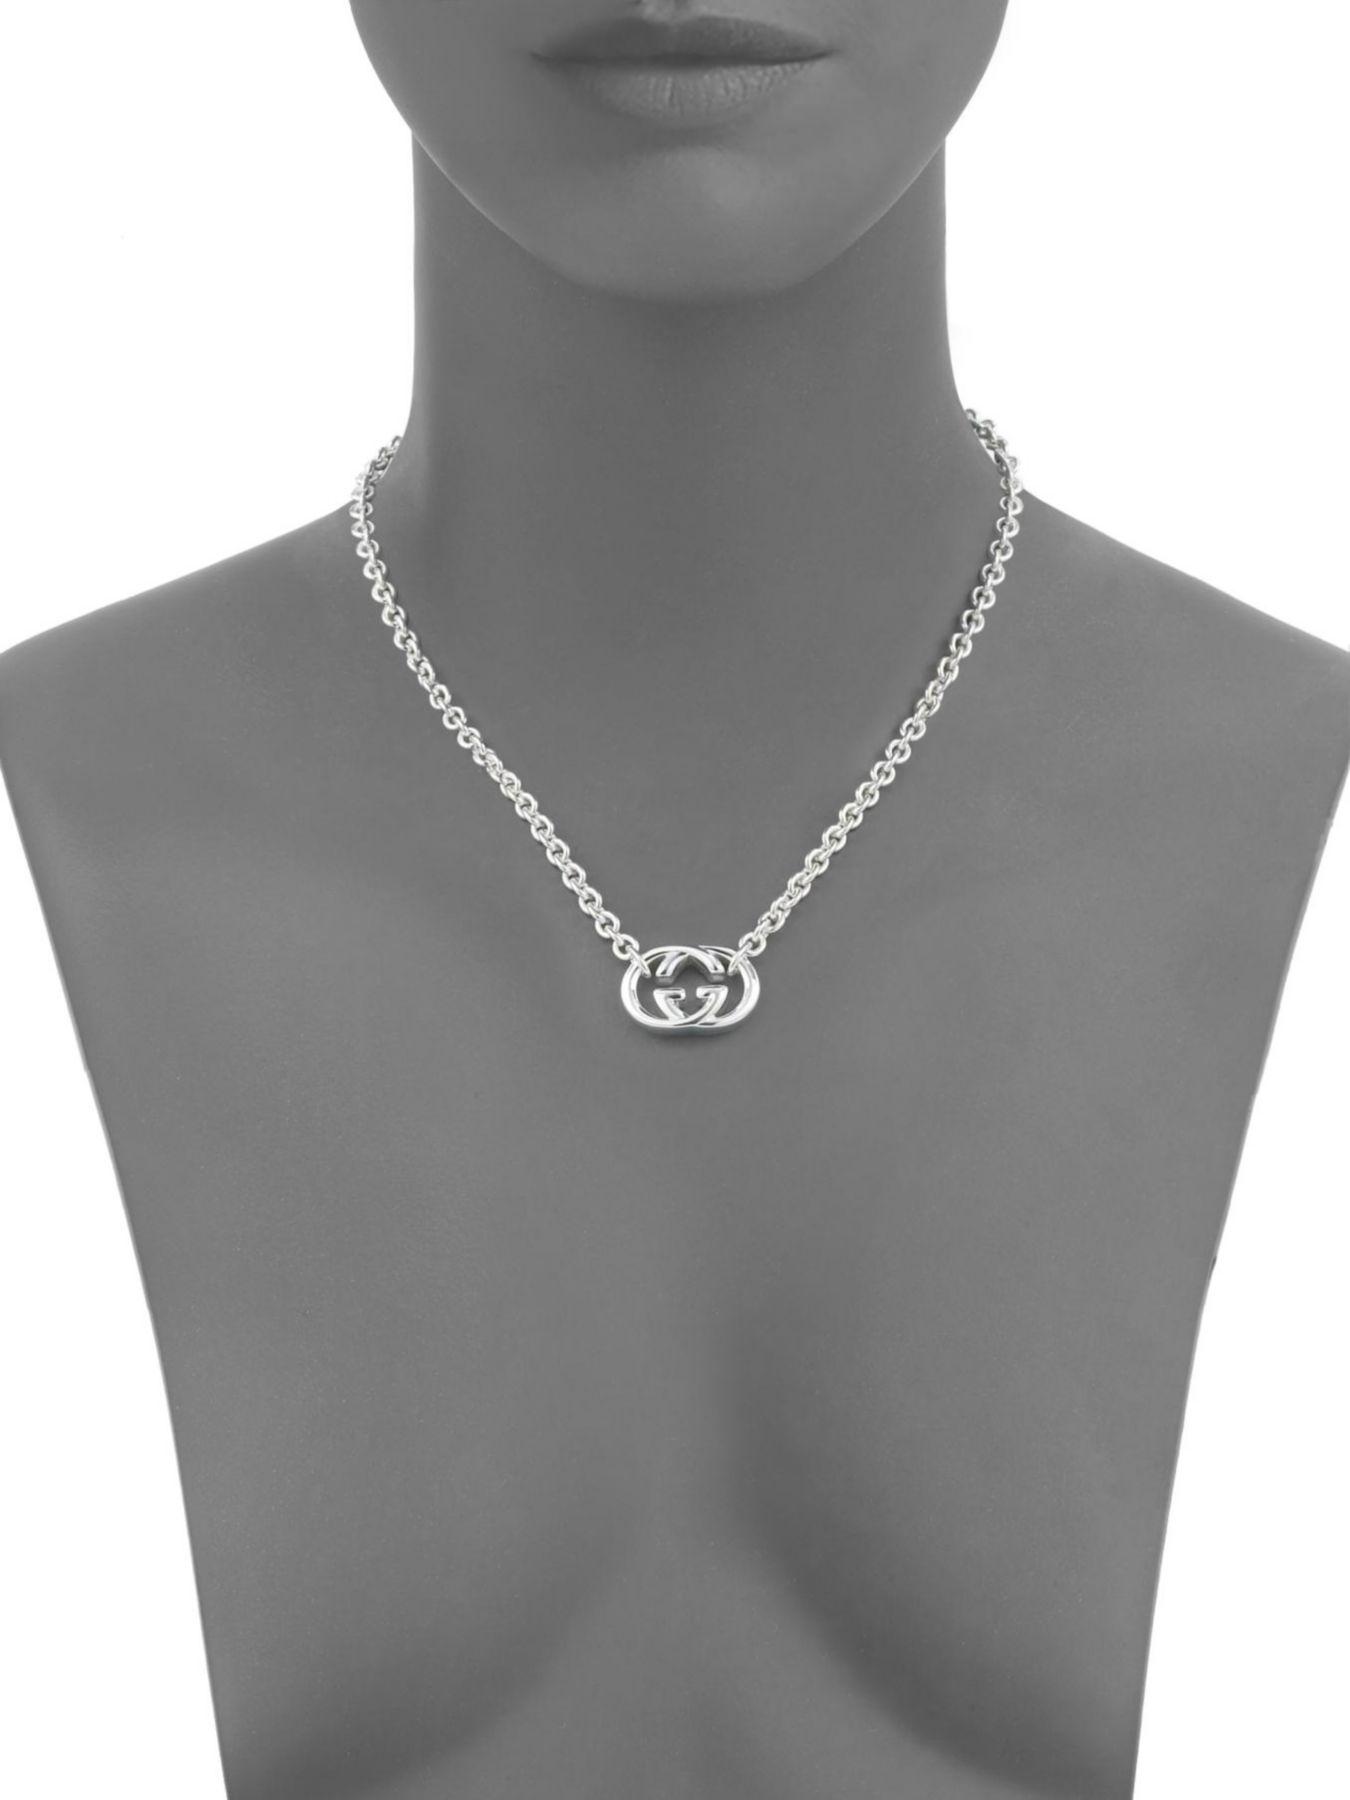 Gucci Double G Sterling Silver Necklace in Metallic | Lyst